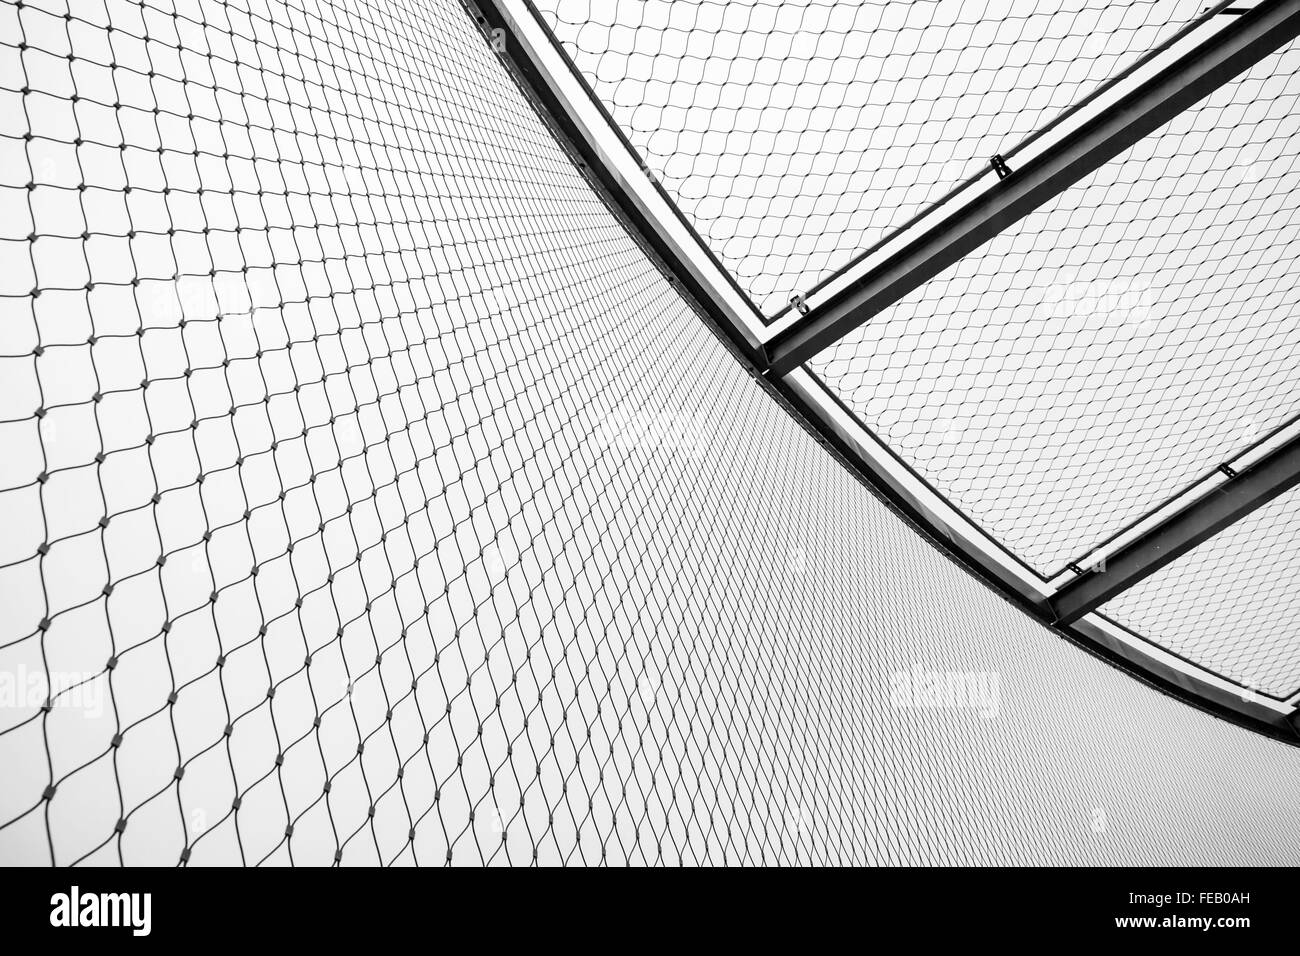 Round steel chain link fence and ceiling, restricted area border Stock Photo